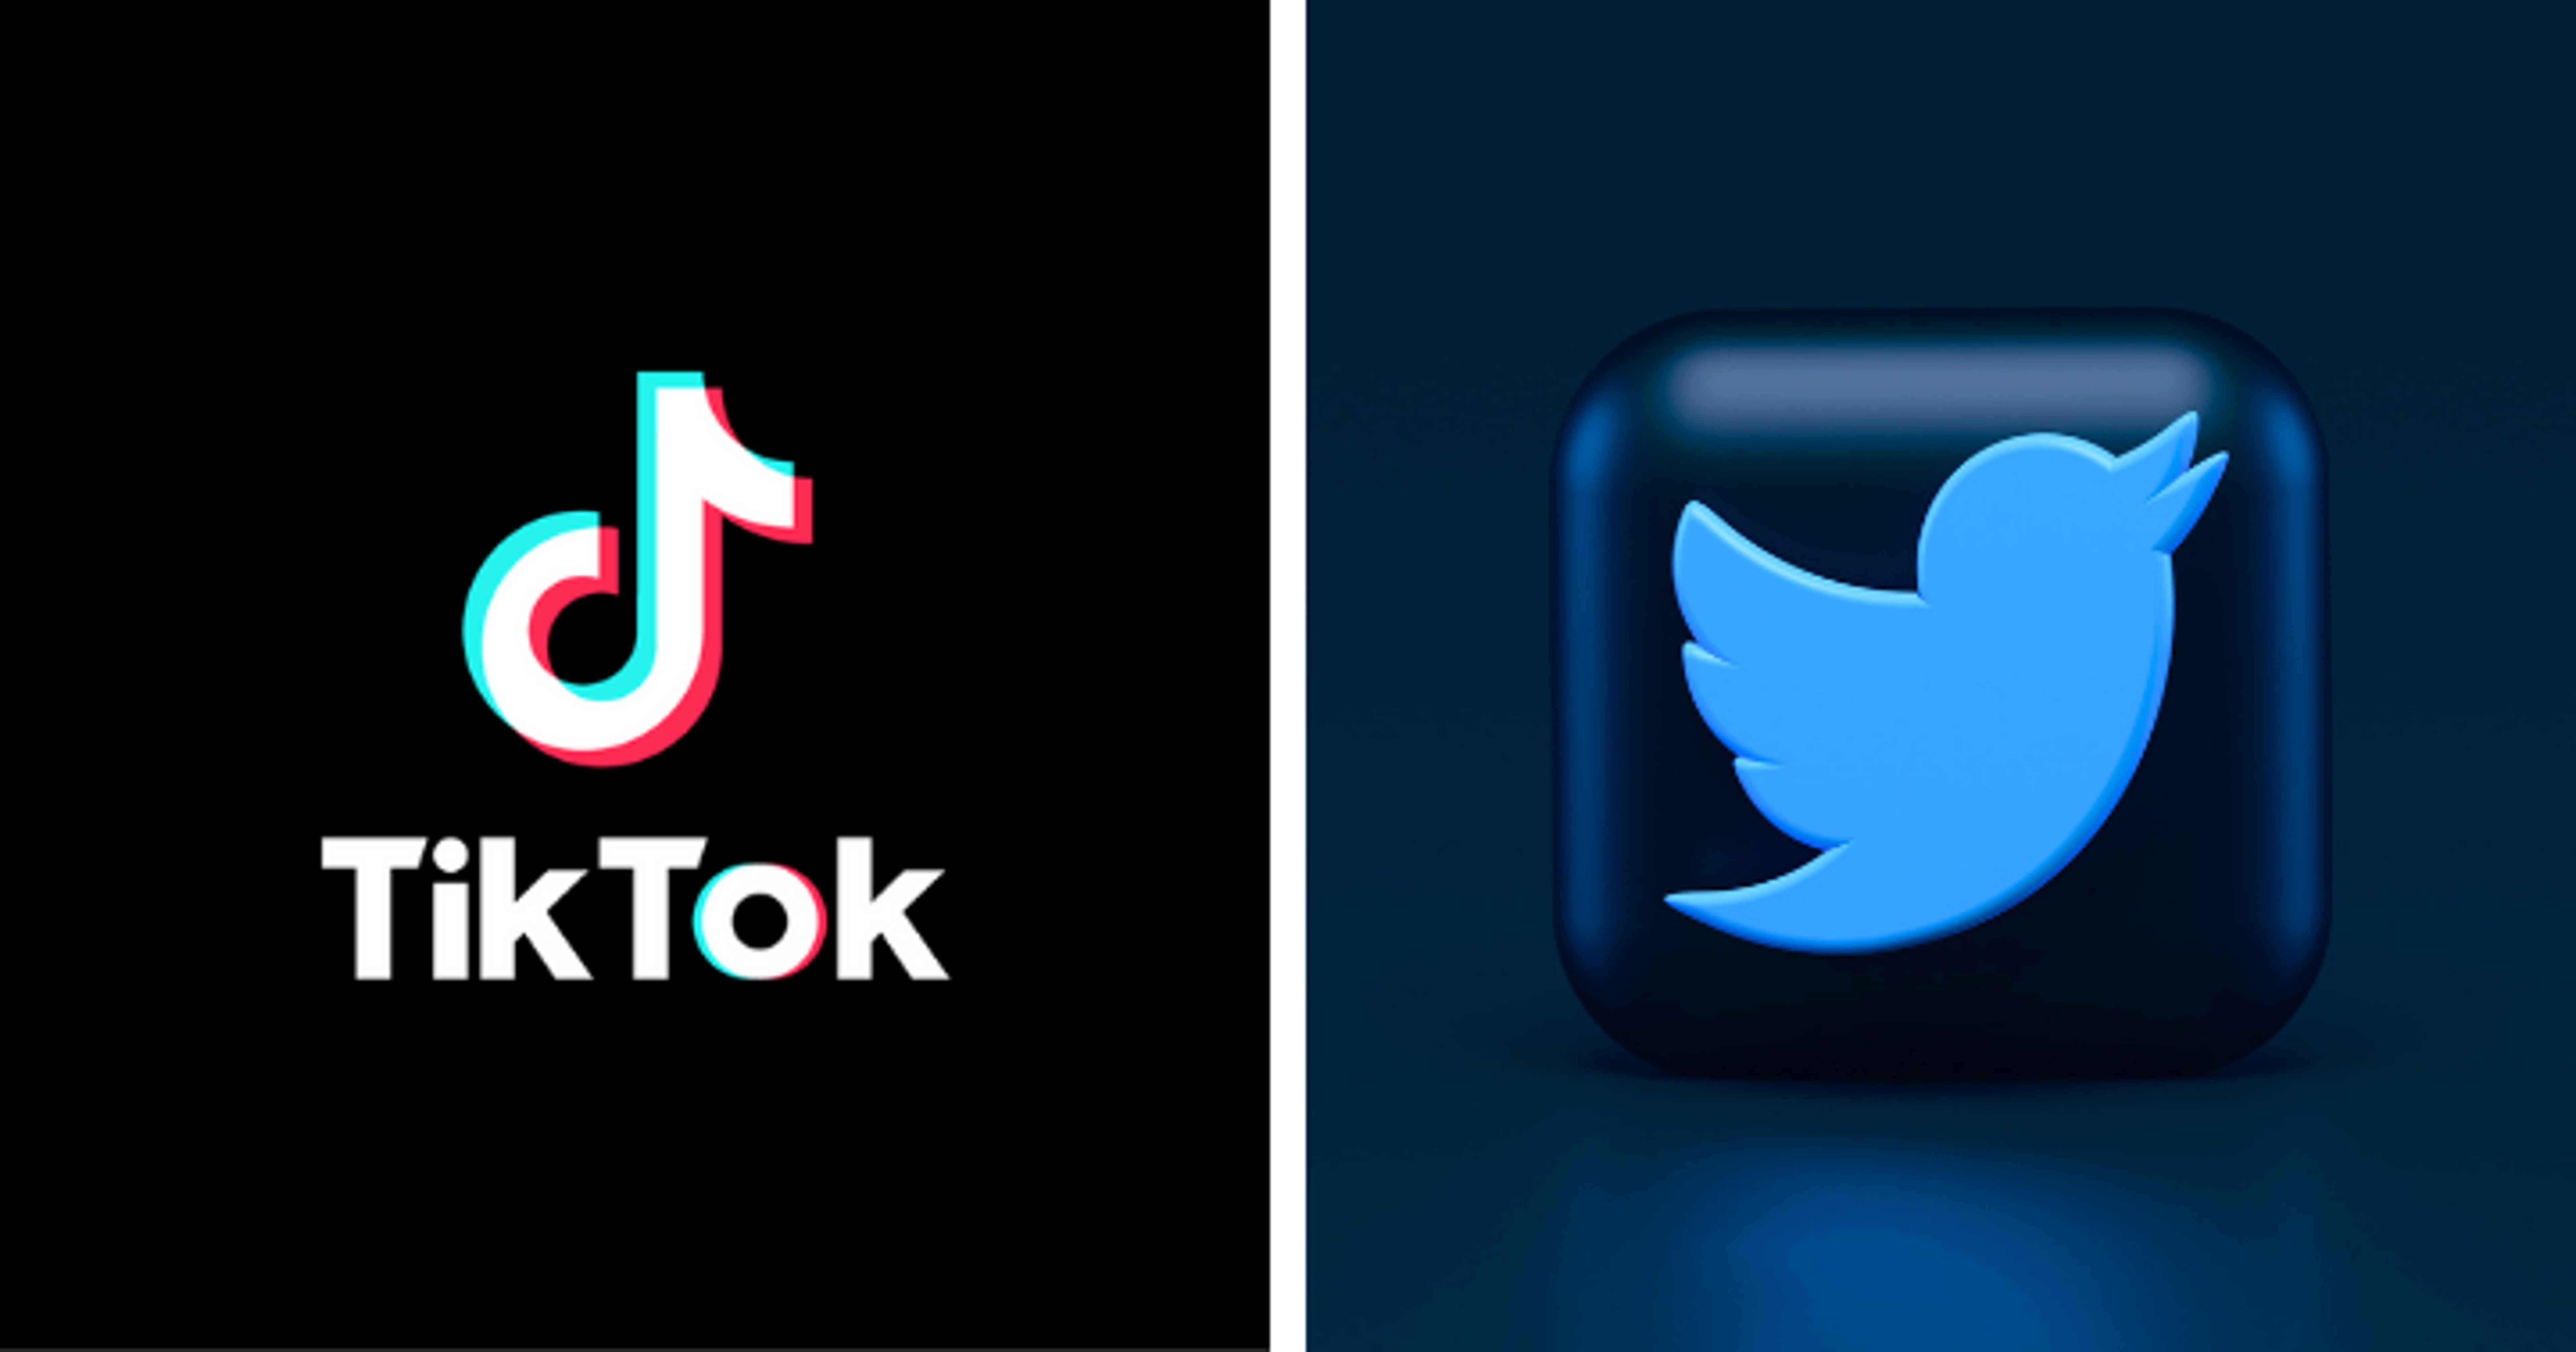 Why Twitter And TikTok Were Big Social Media Winners In Q2